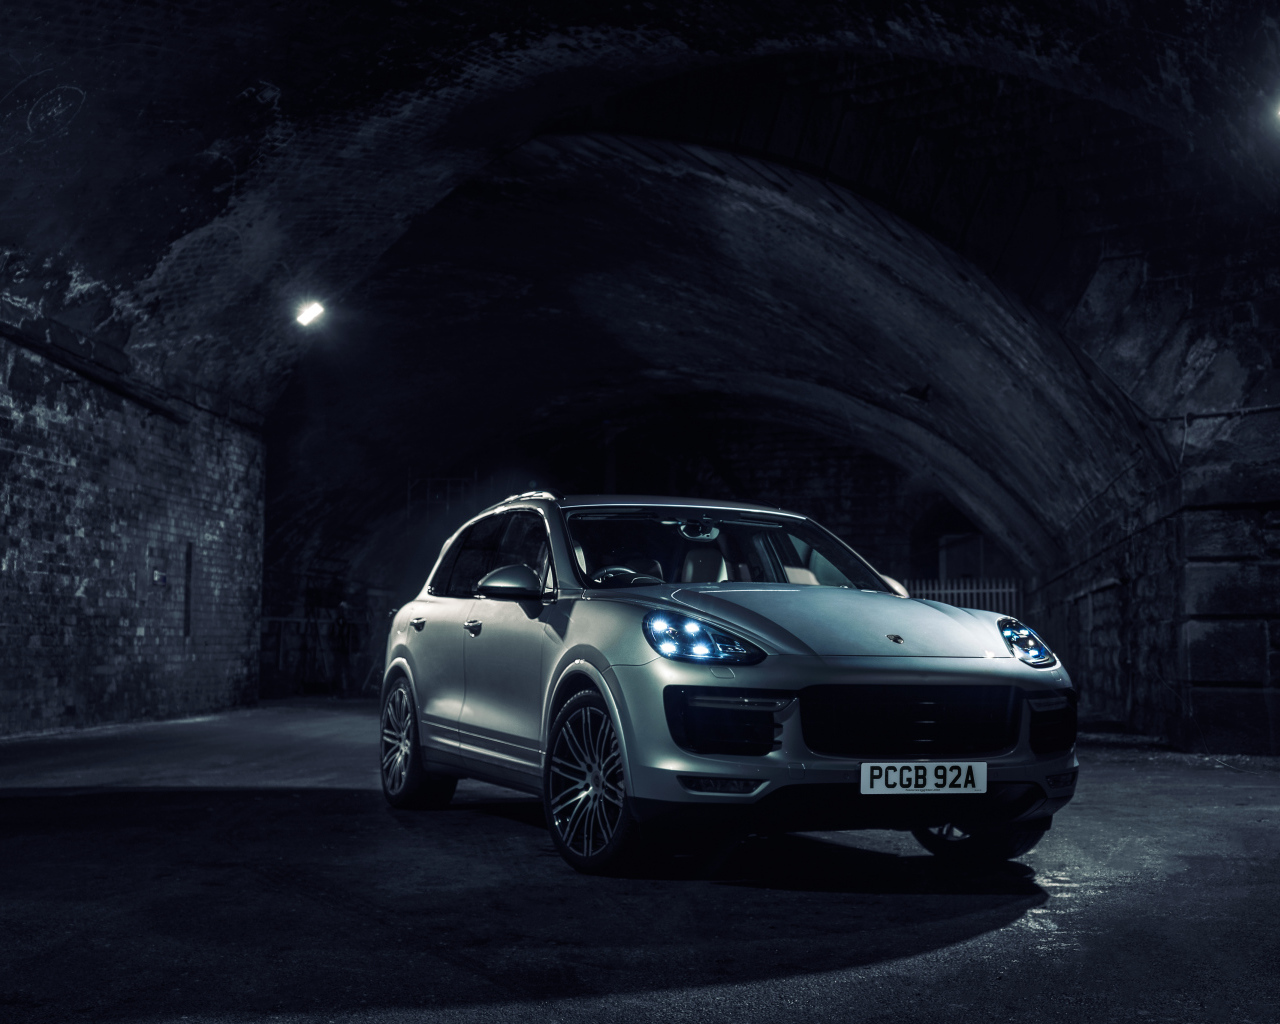 Silver Porsche Cayenne in a tunnel with lights on